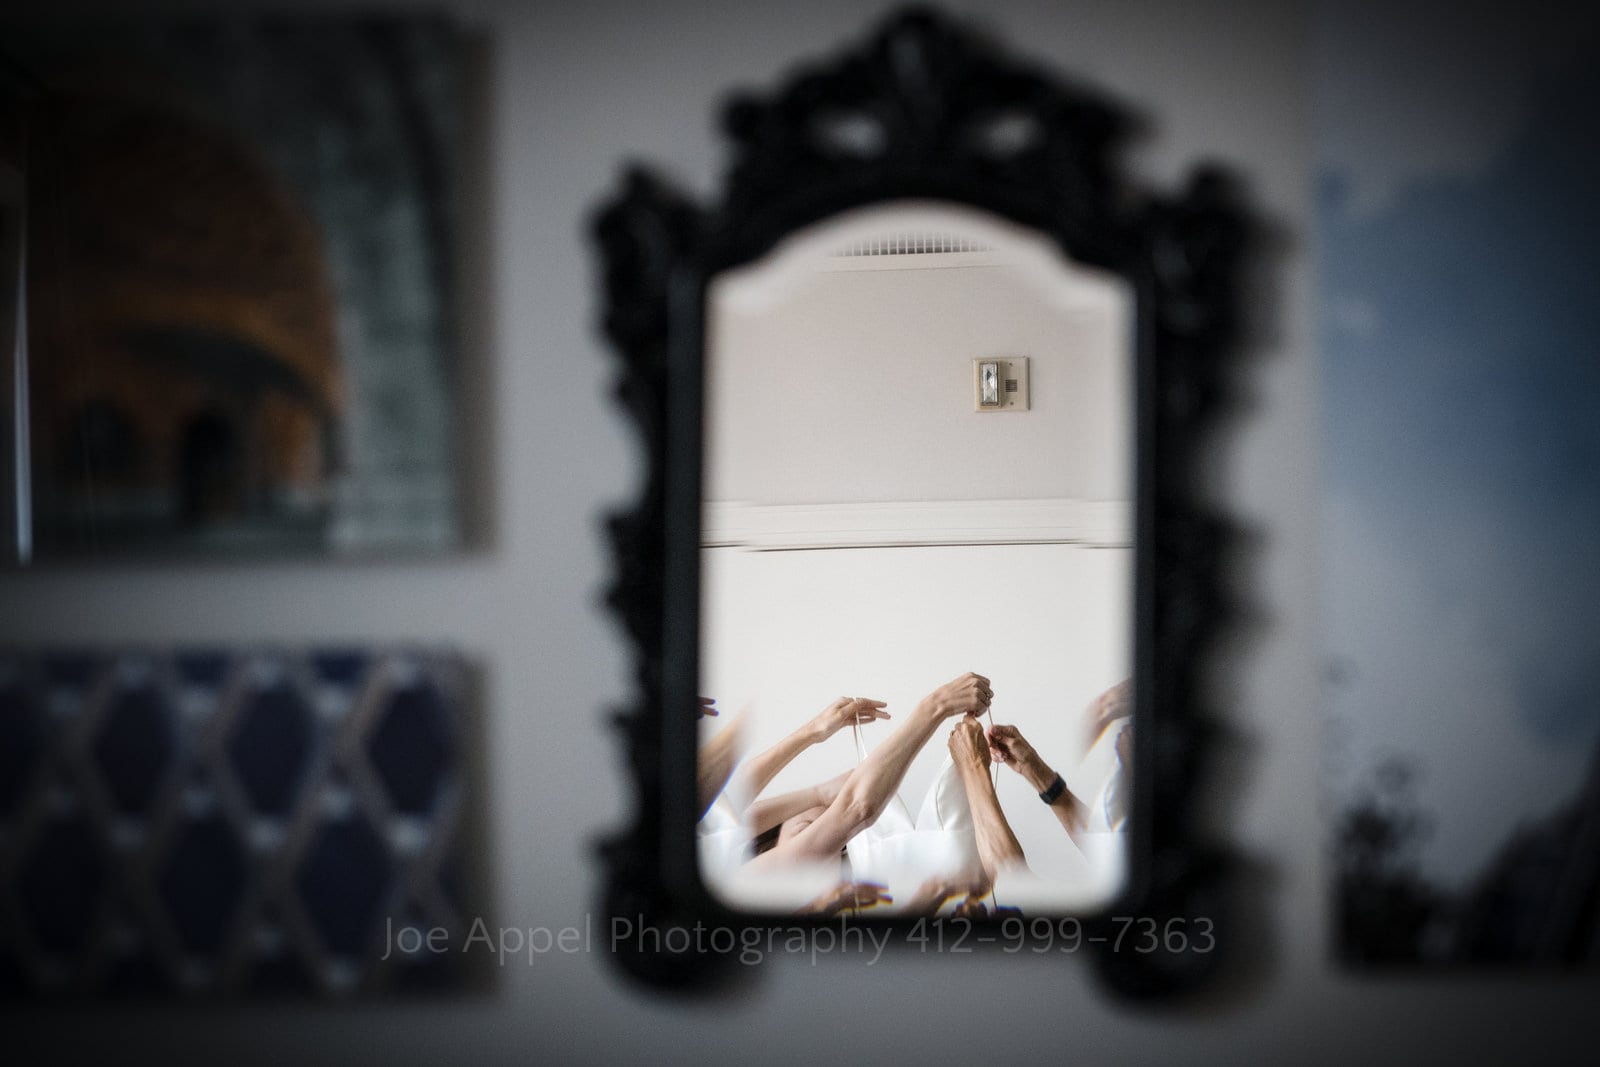 A framed mirror hanging on a wall reflects a bunch of hands holding a wedding dress as a bride gets dressed.